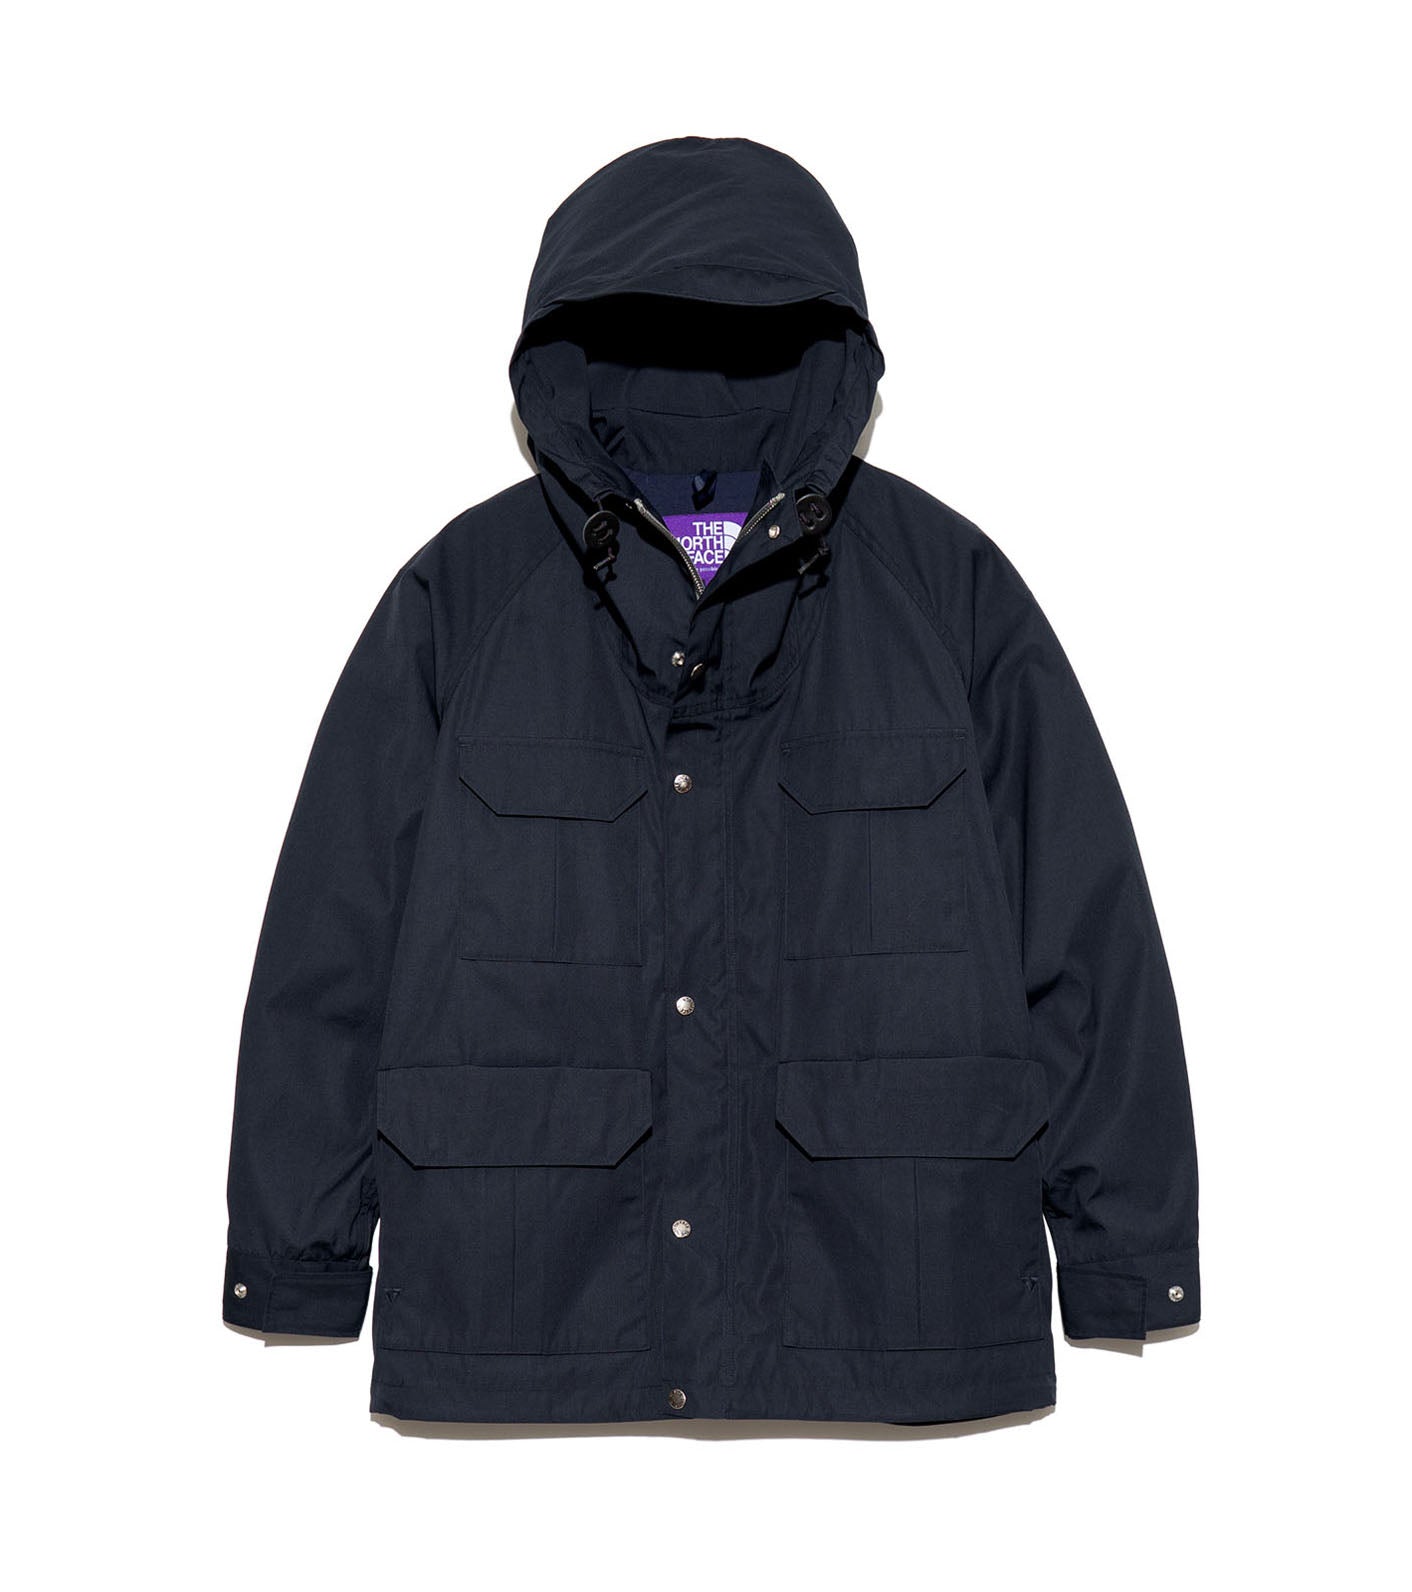 nanamica / THE NORTH FACE PURPLE LABEL / Featured Product vol.64